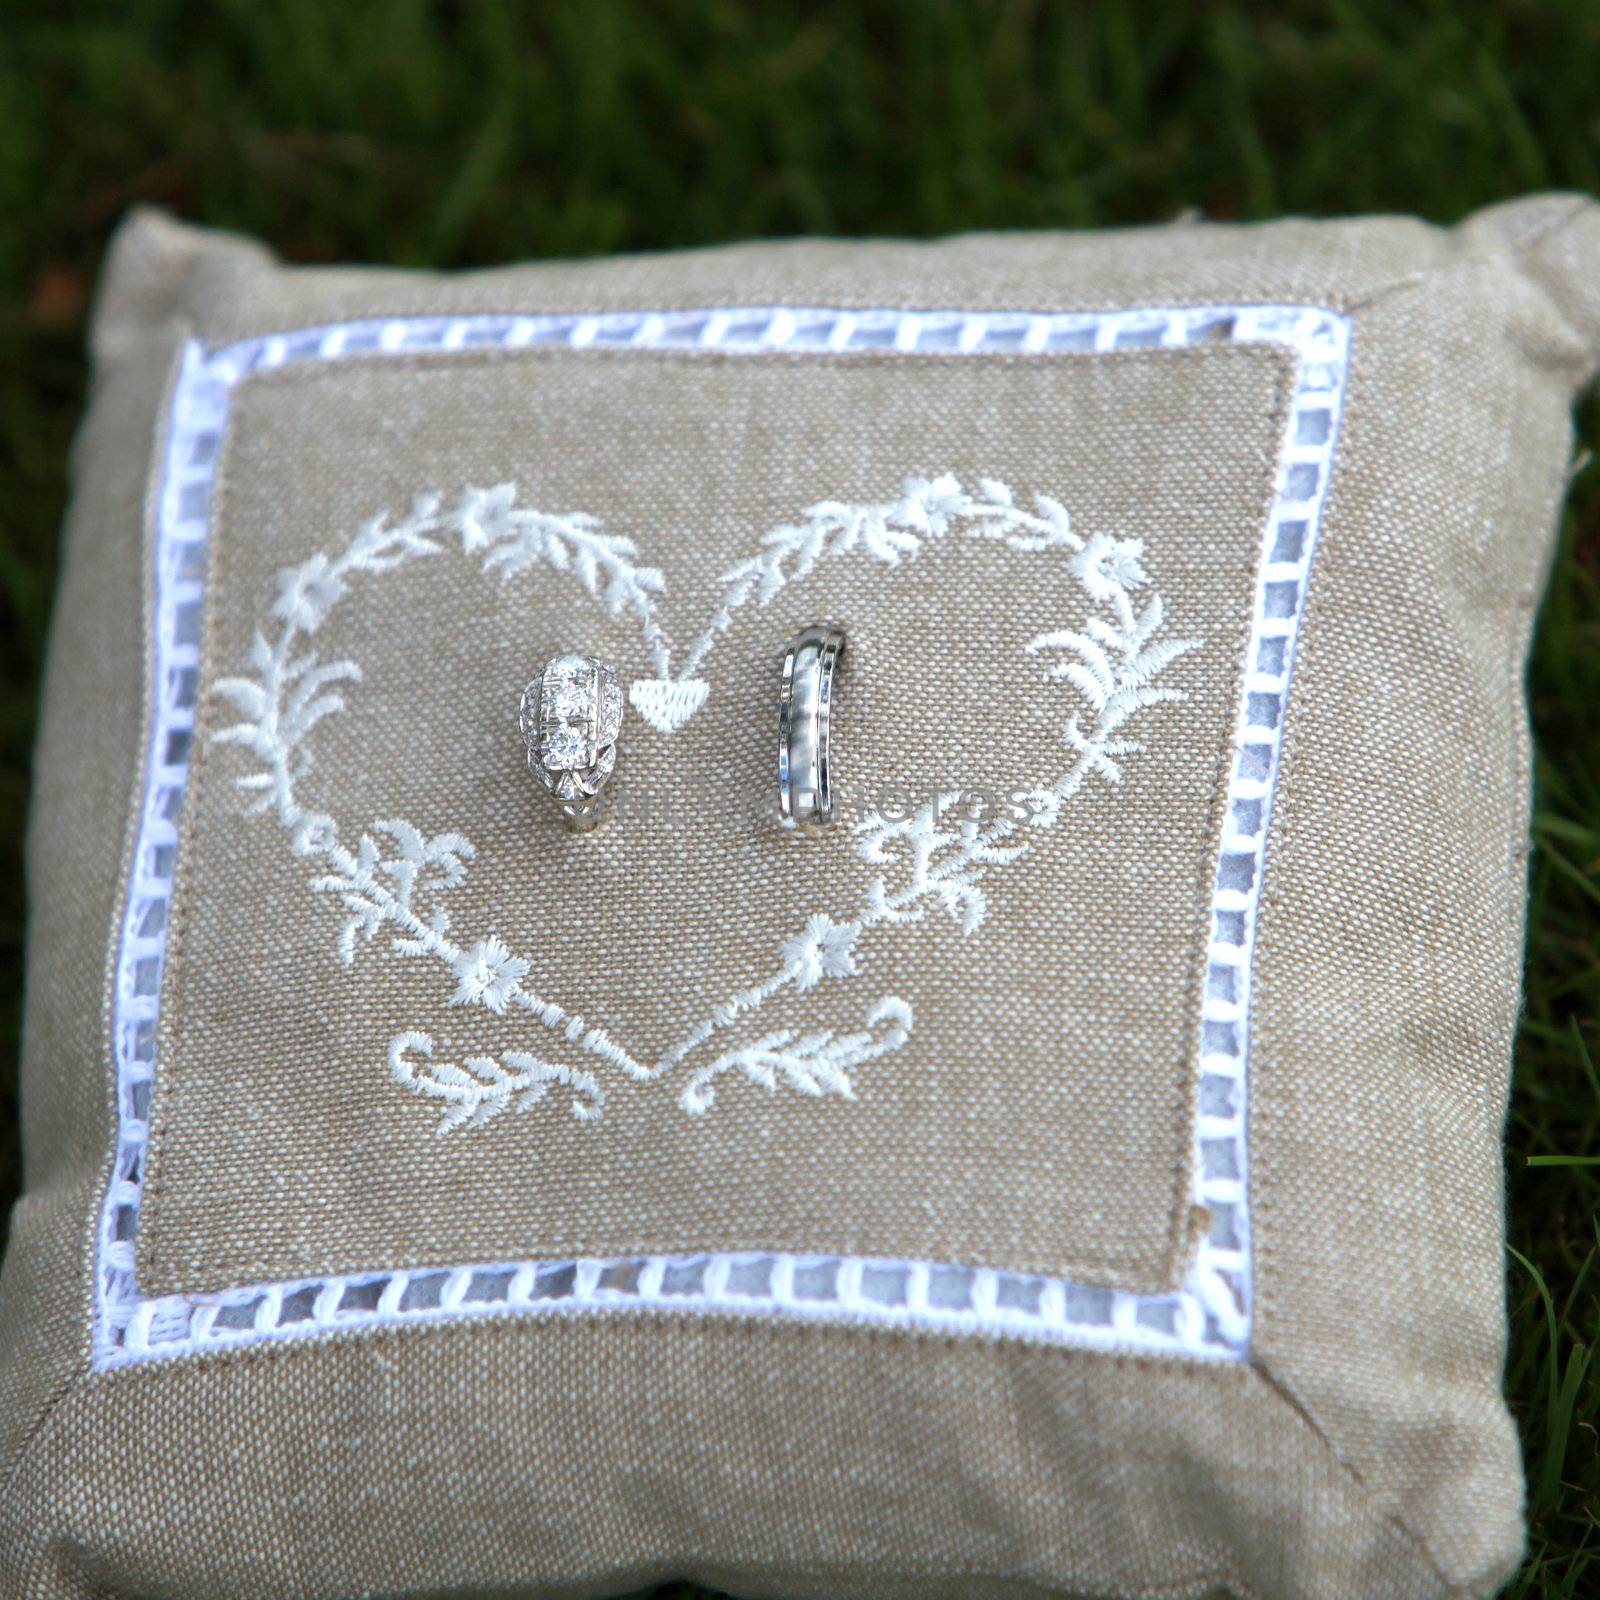 wedding rings on a pillow by Farina6000